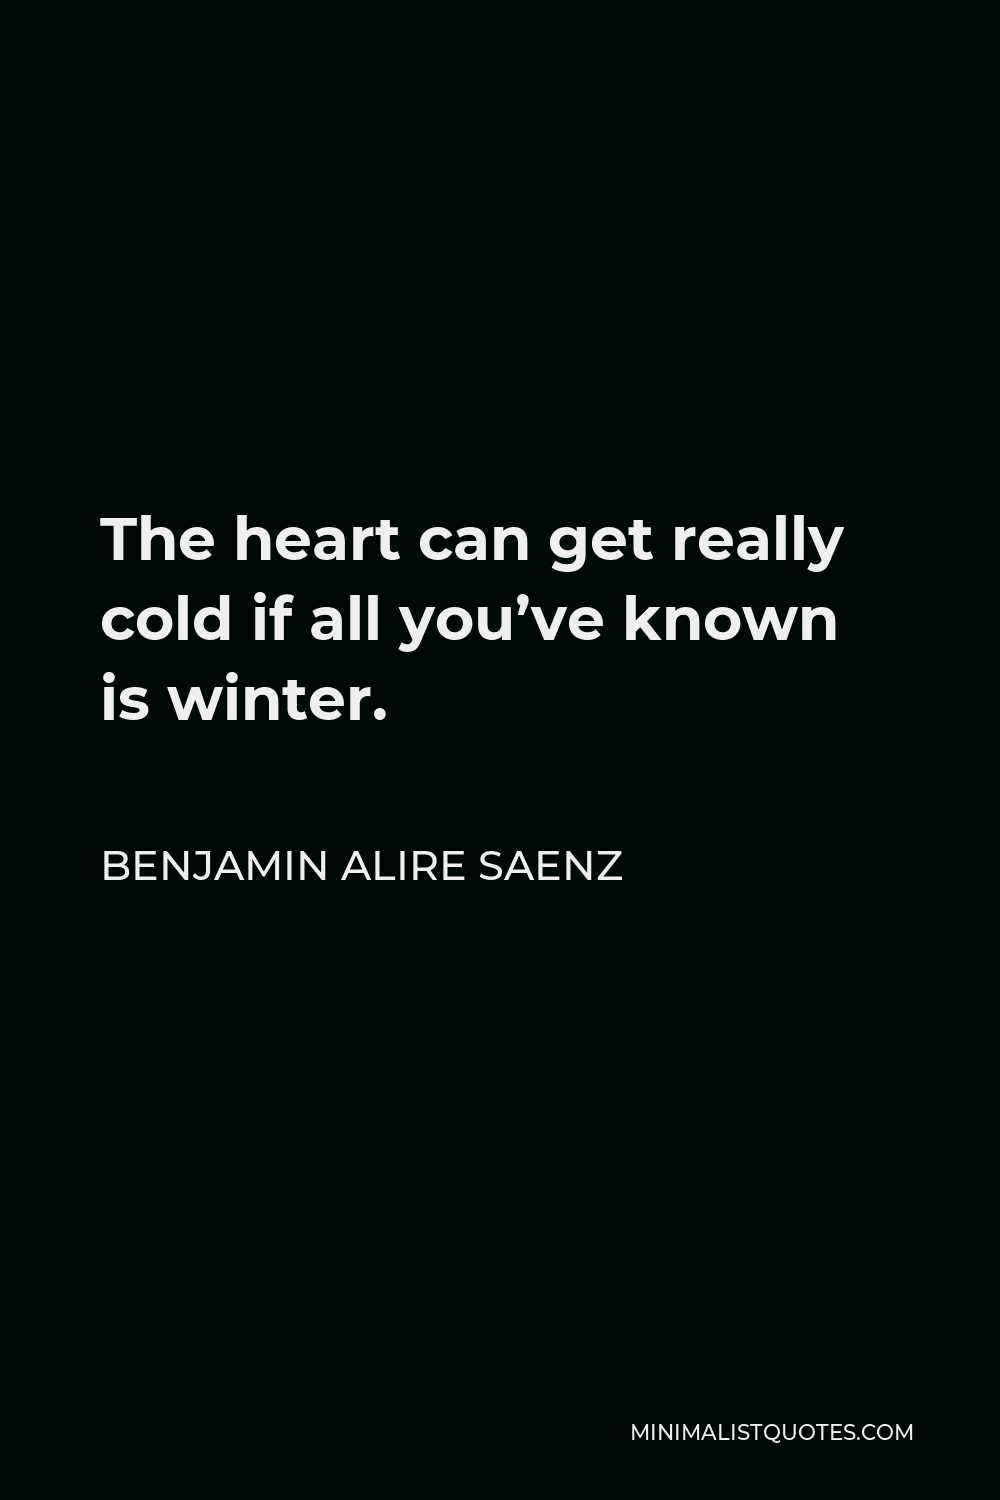 Benjamin Alire Saenz Quote - The heart can get really cold if all you’ve known is winter.